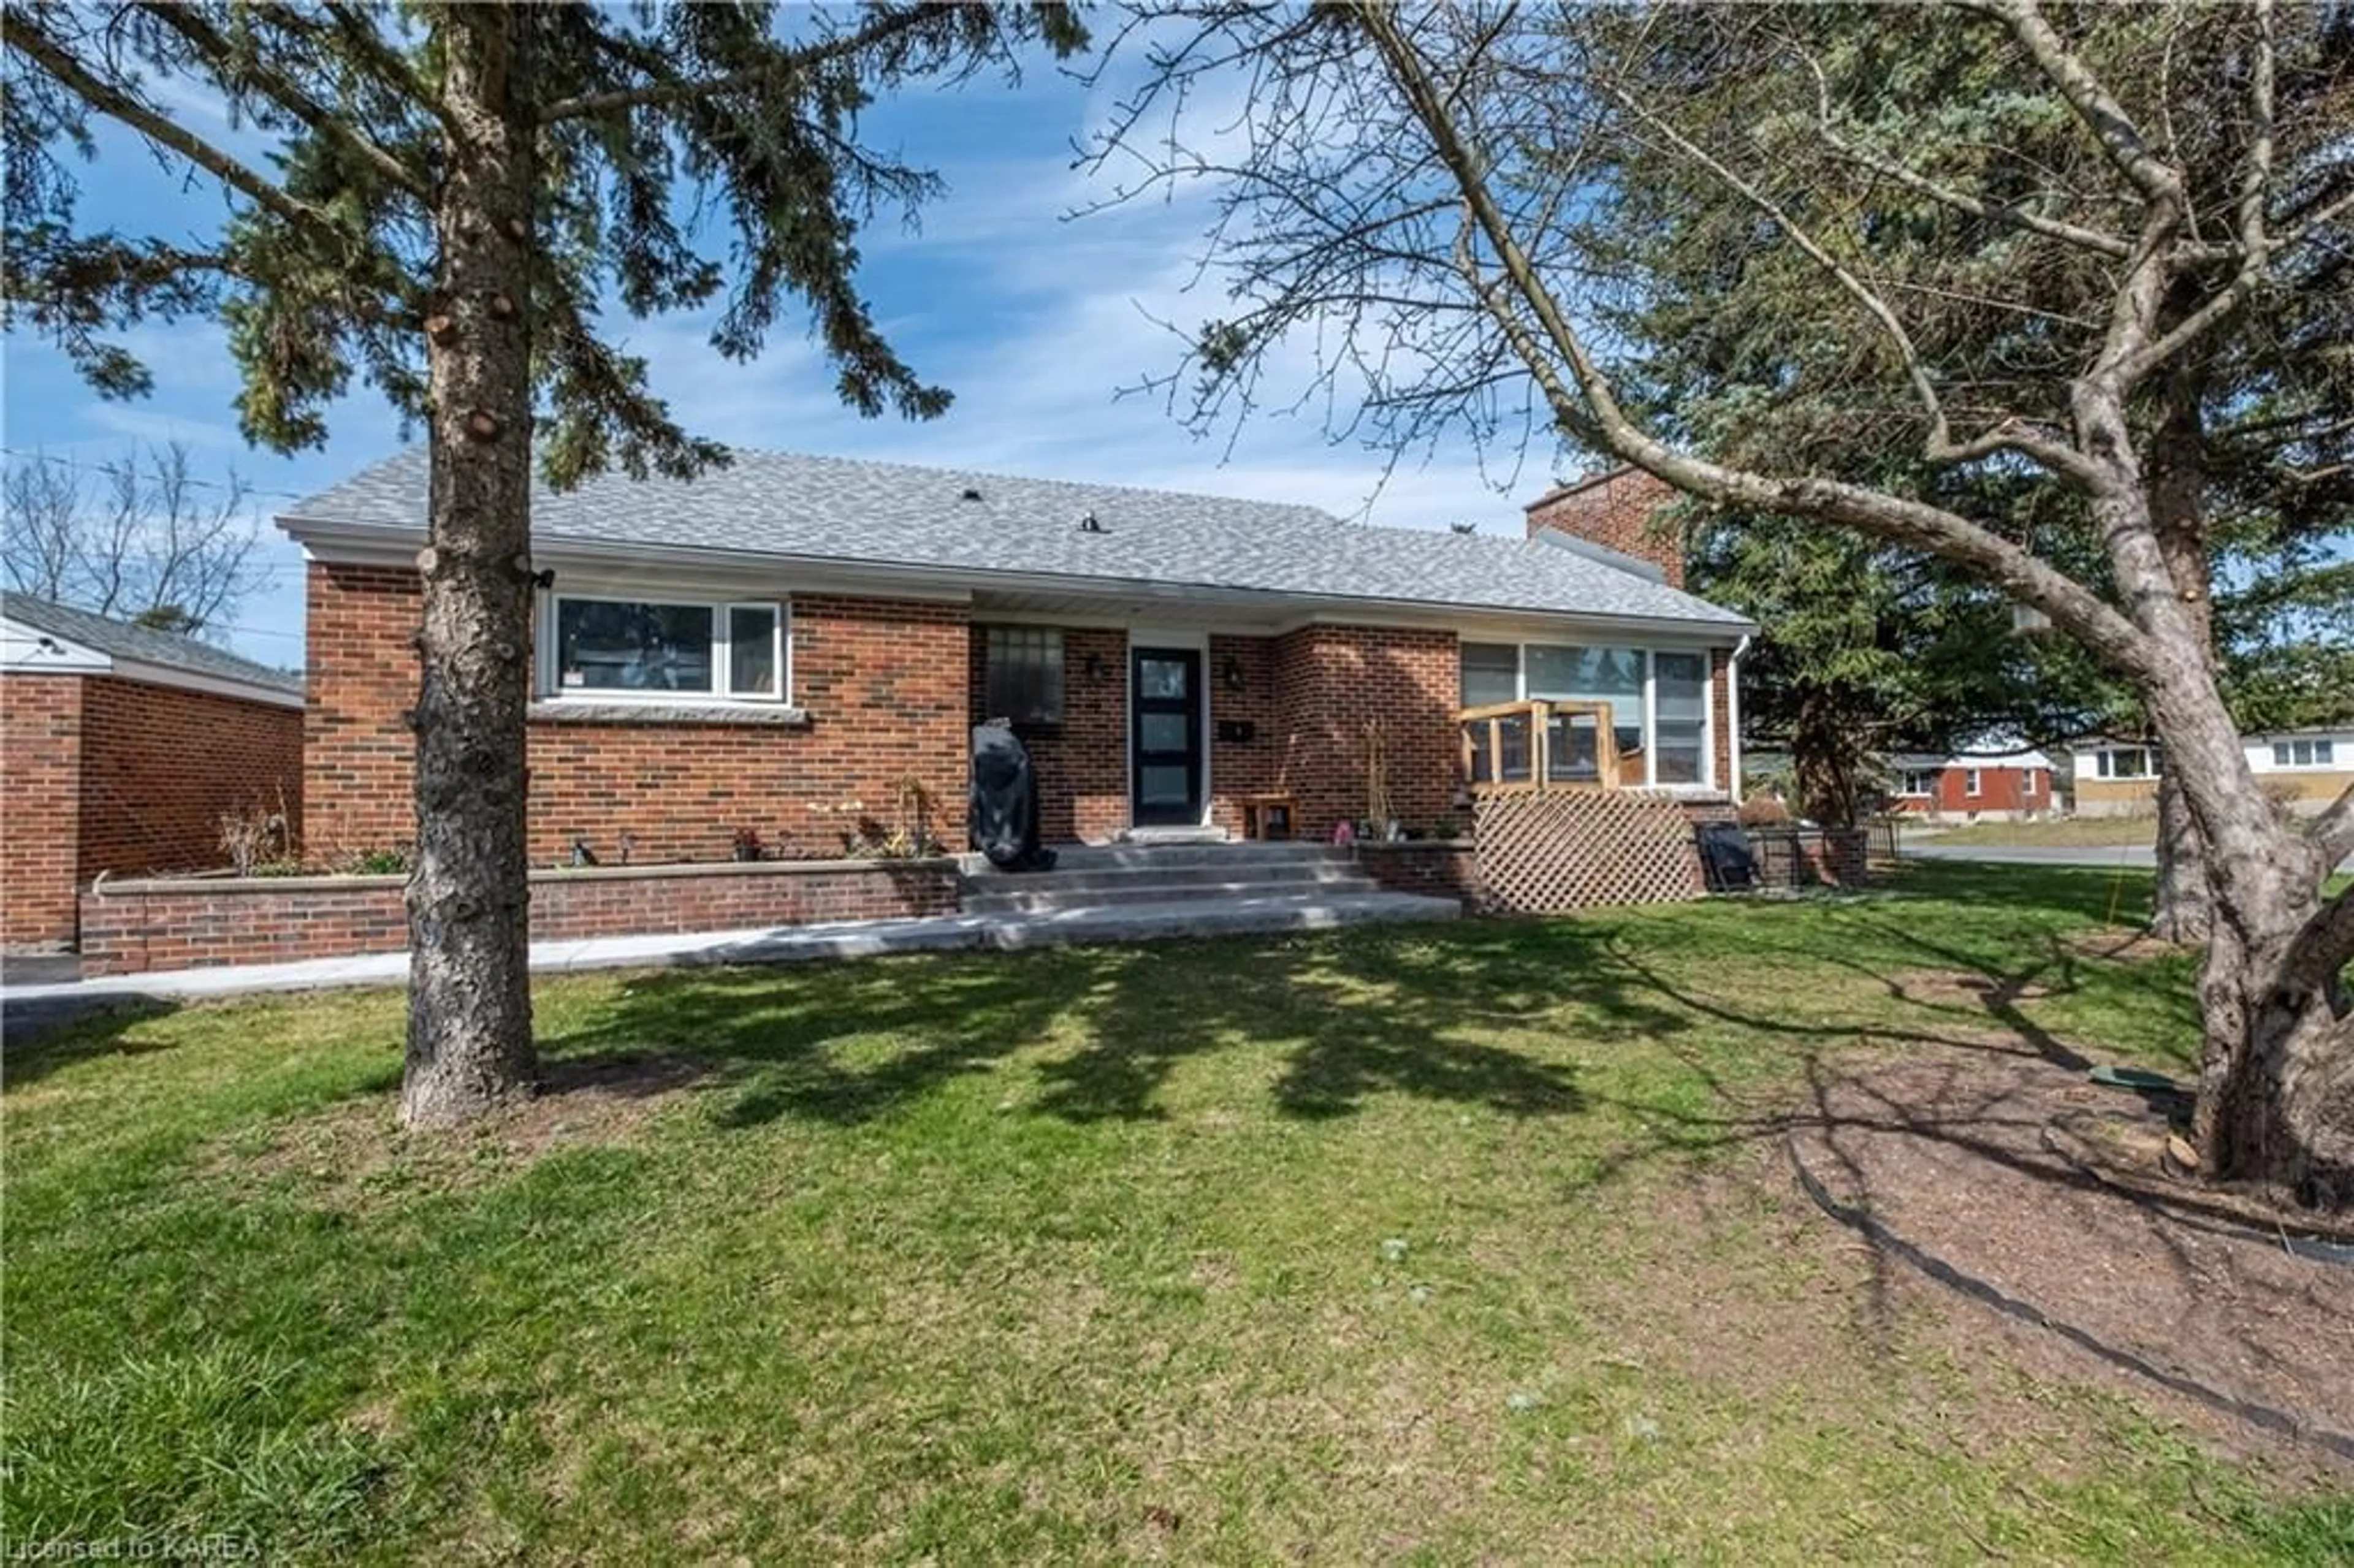 Home with brick exterior material for 9 Elizabeth Ave, Kingston Ontario K7M 3G9